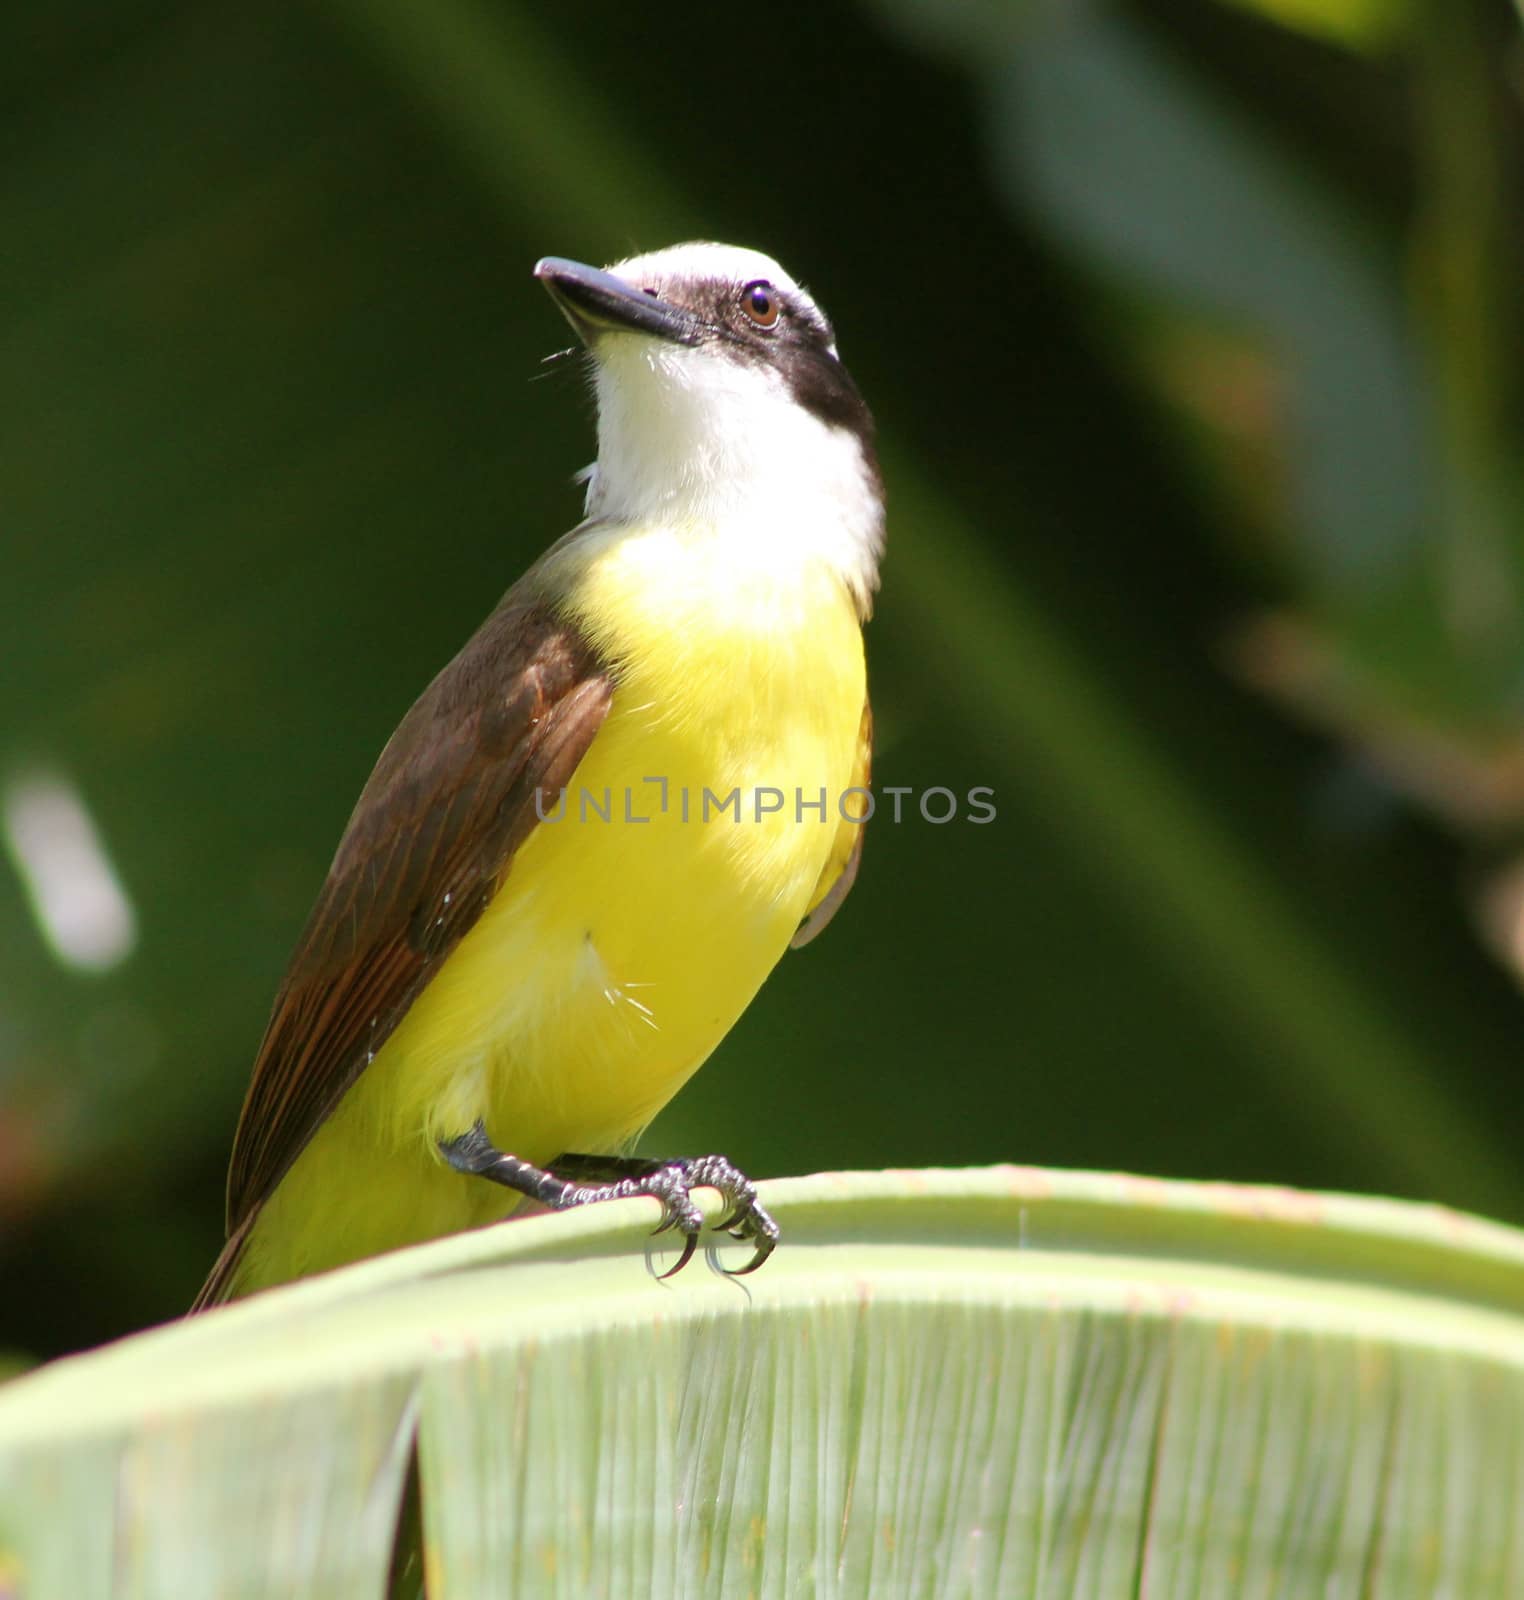 A colourful and usually noisy kiskadee perched in a palm tree in Mexico.